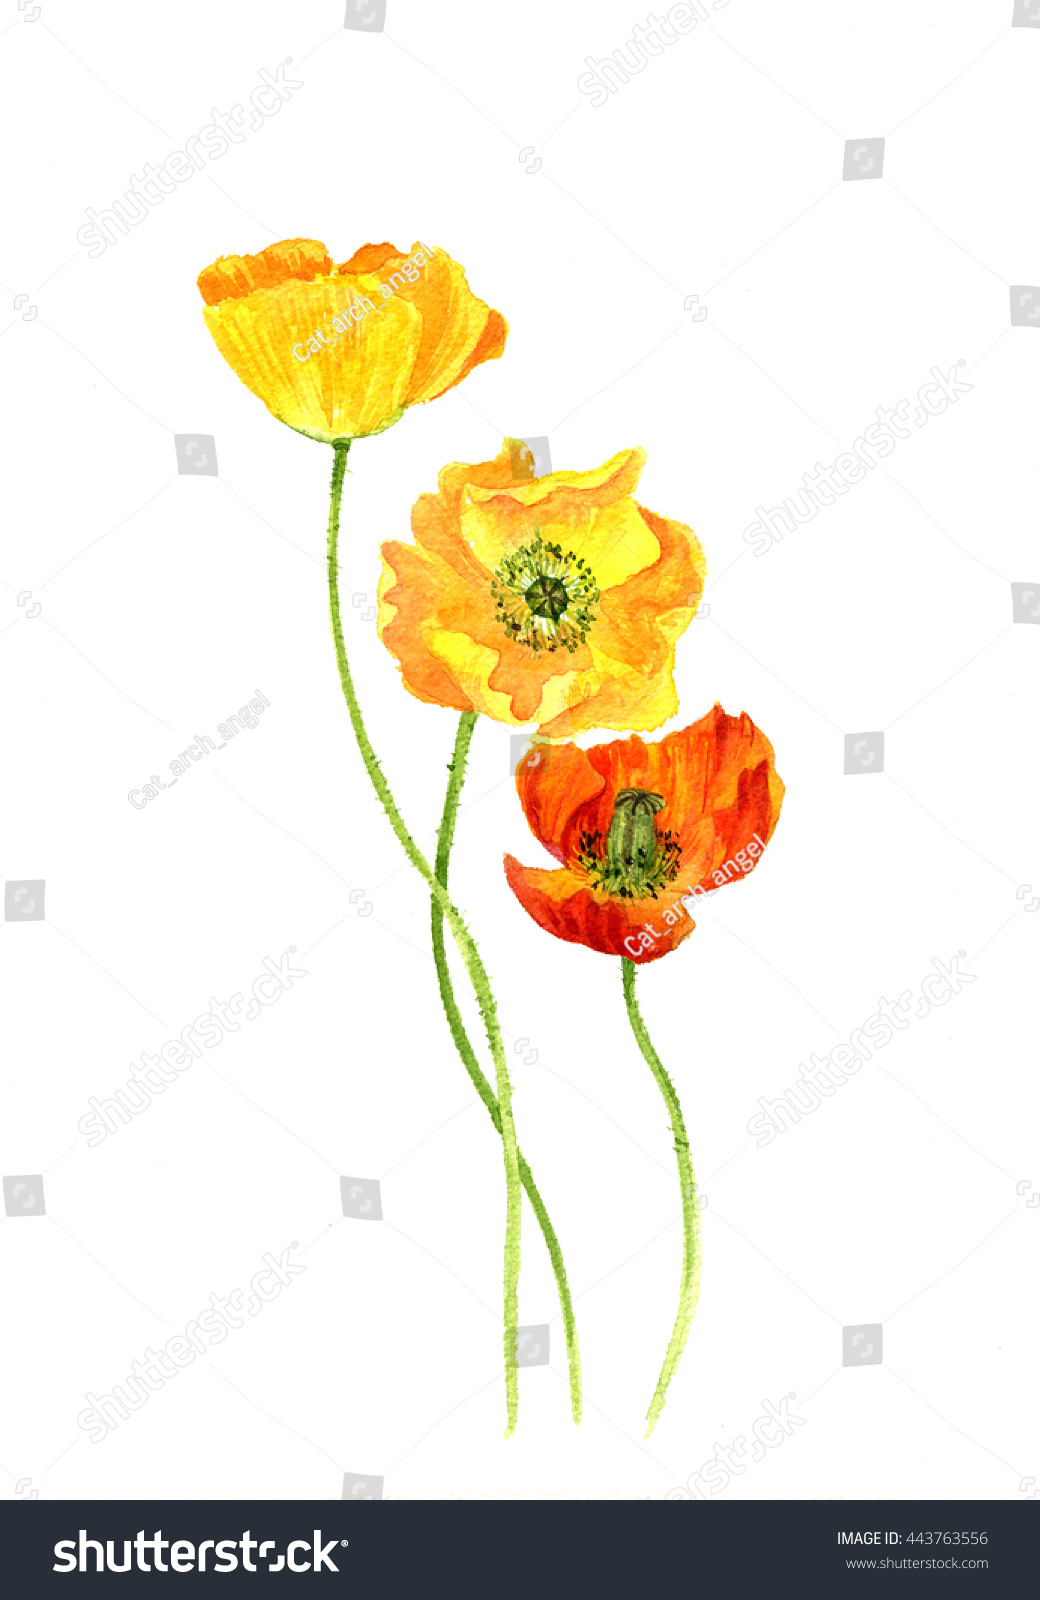 Watercolor Drawing Flowers Yellow Poppies Painted Stock Illustration ...